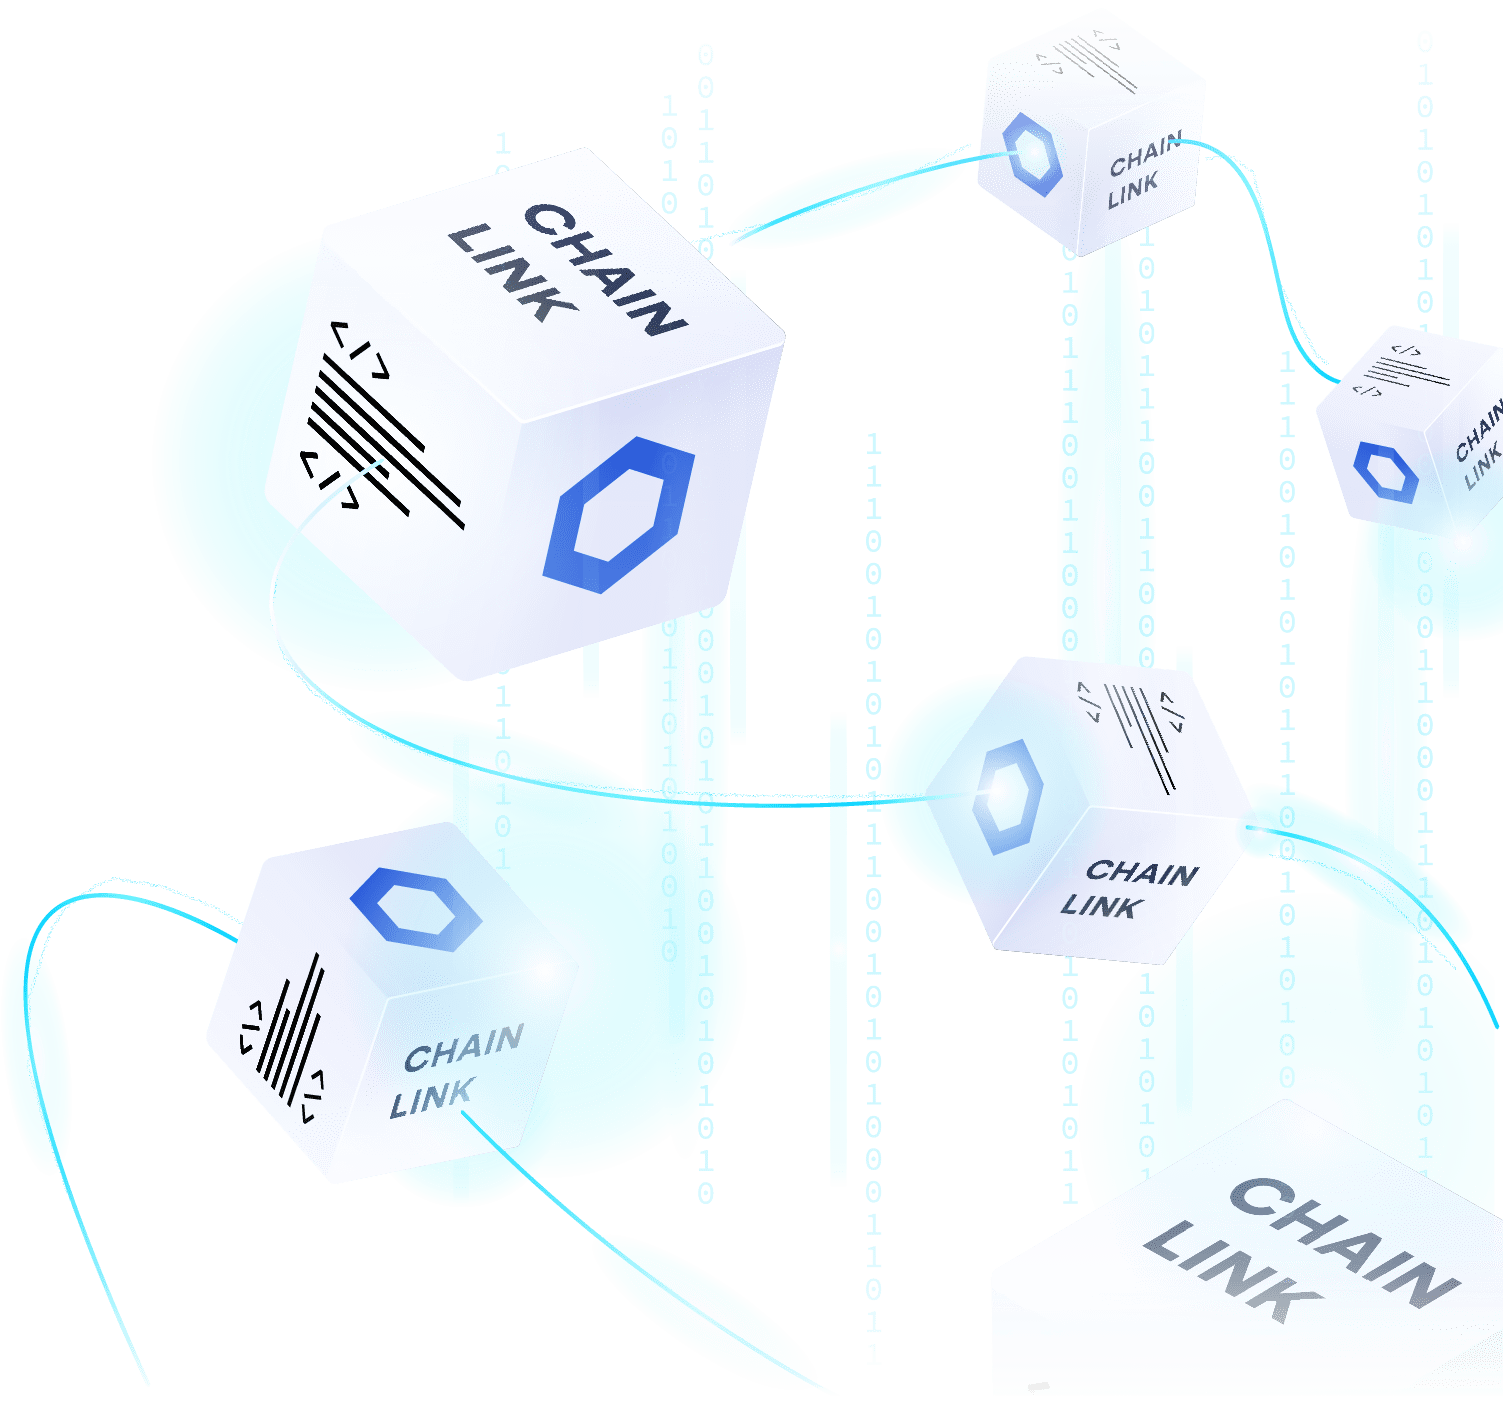 Decorative graphic illustrating multiple Chainlink cubes connecting with glowing light orbs and streams of ones and zeros.